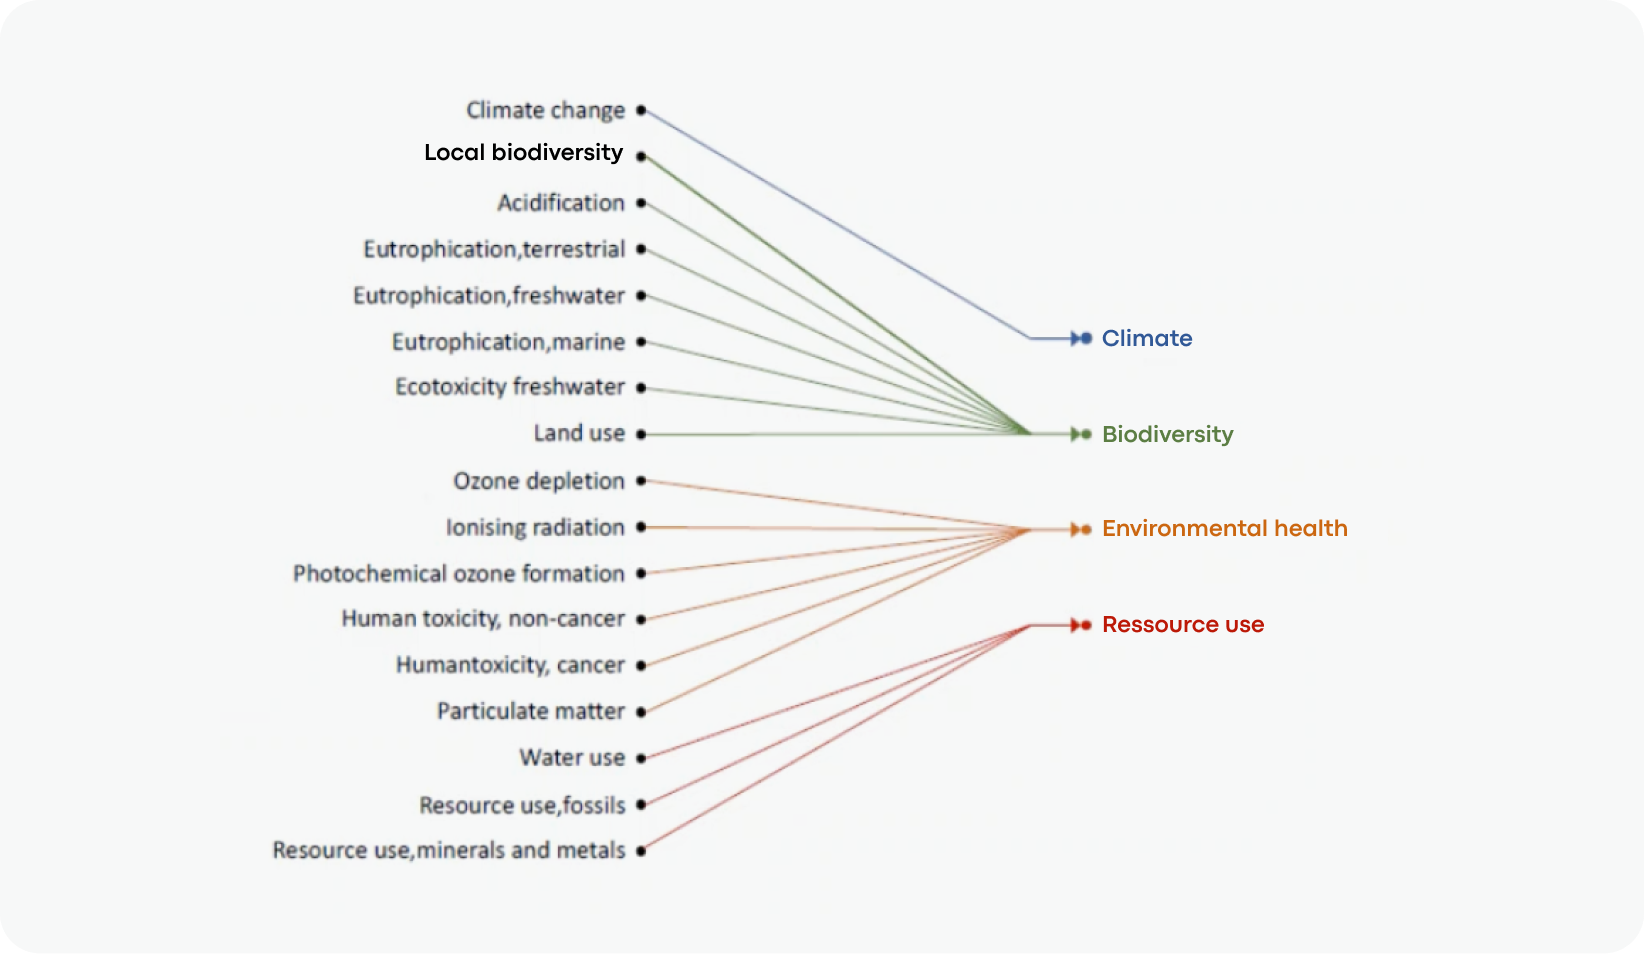 A visualization of the different environmental indicators of the PEFCR.